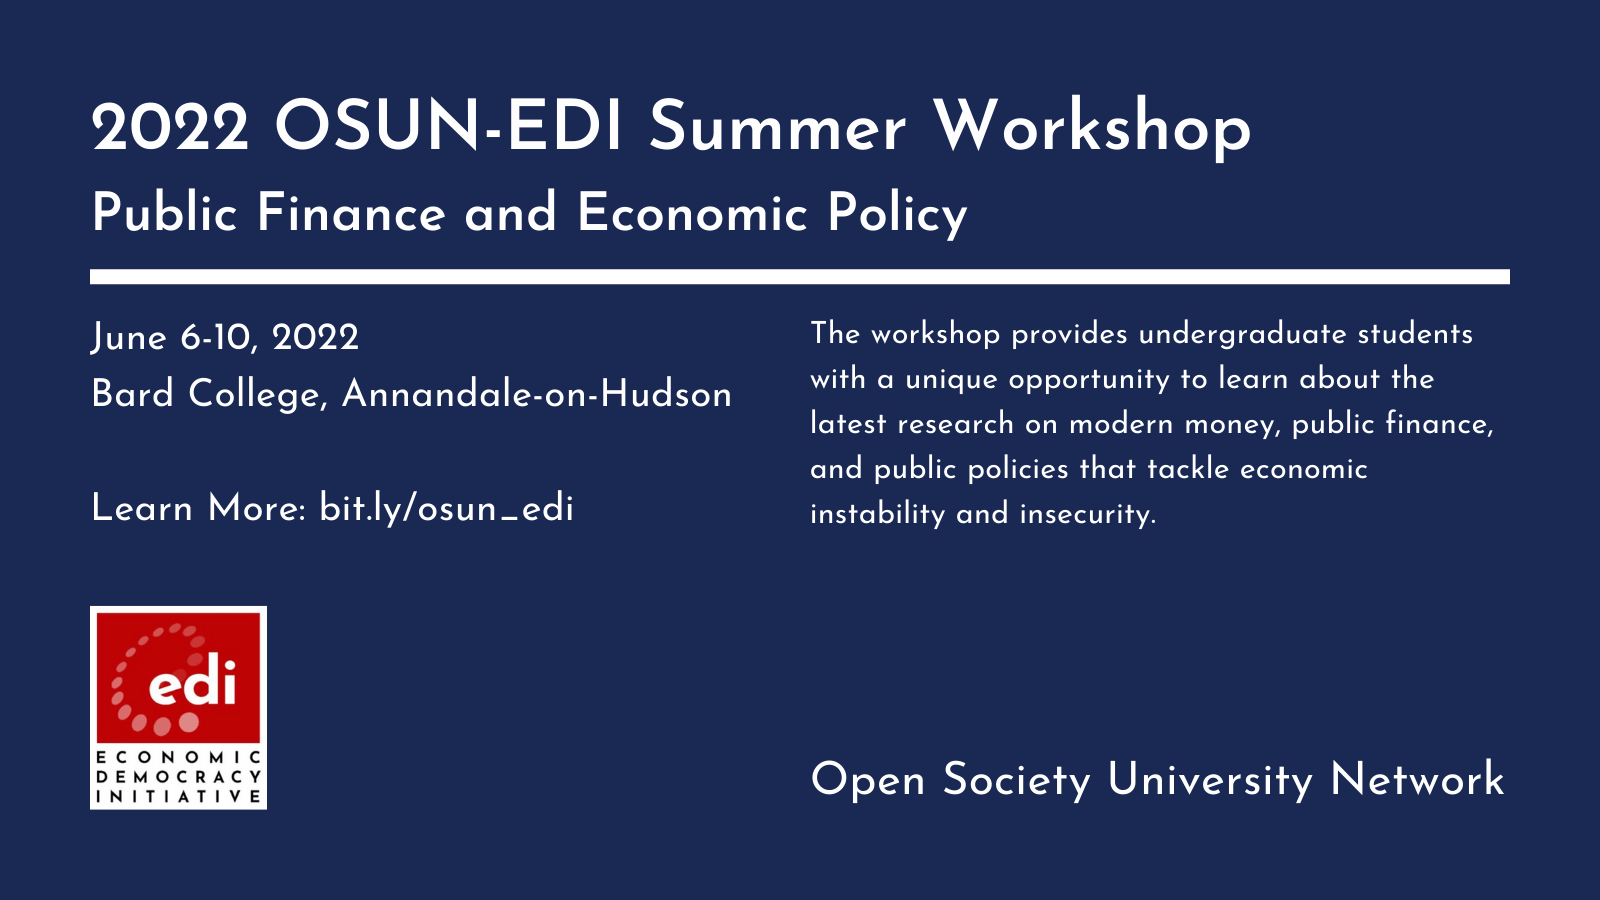 Summer Workshop in Public Finance and Economic Policy